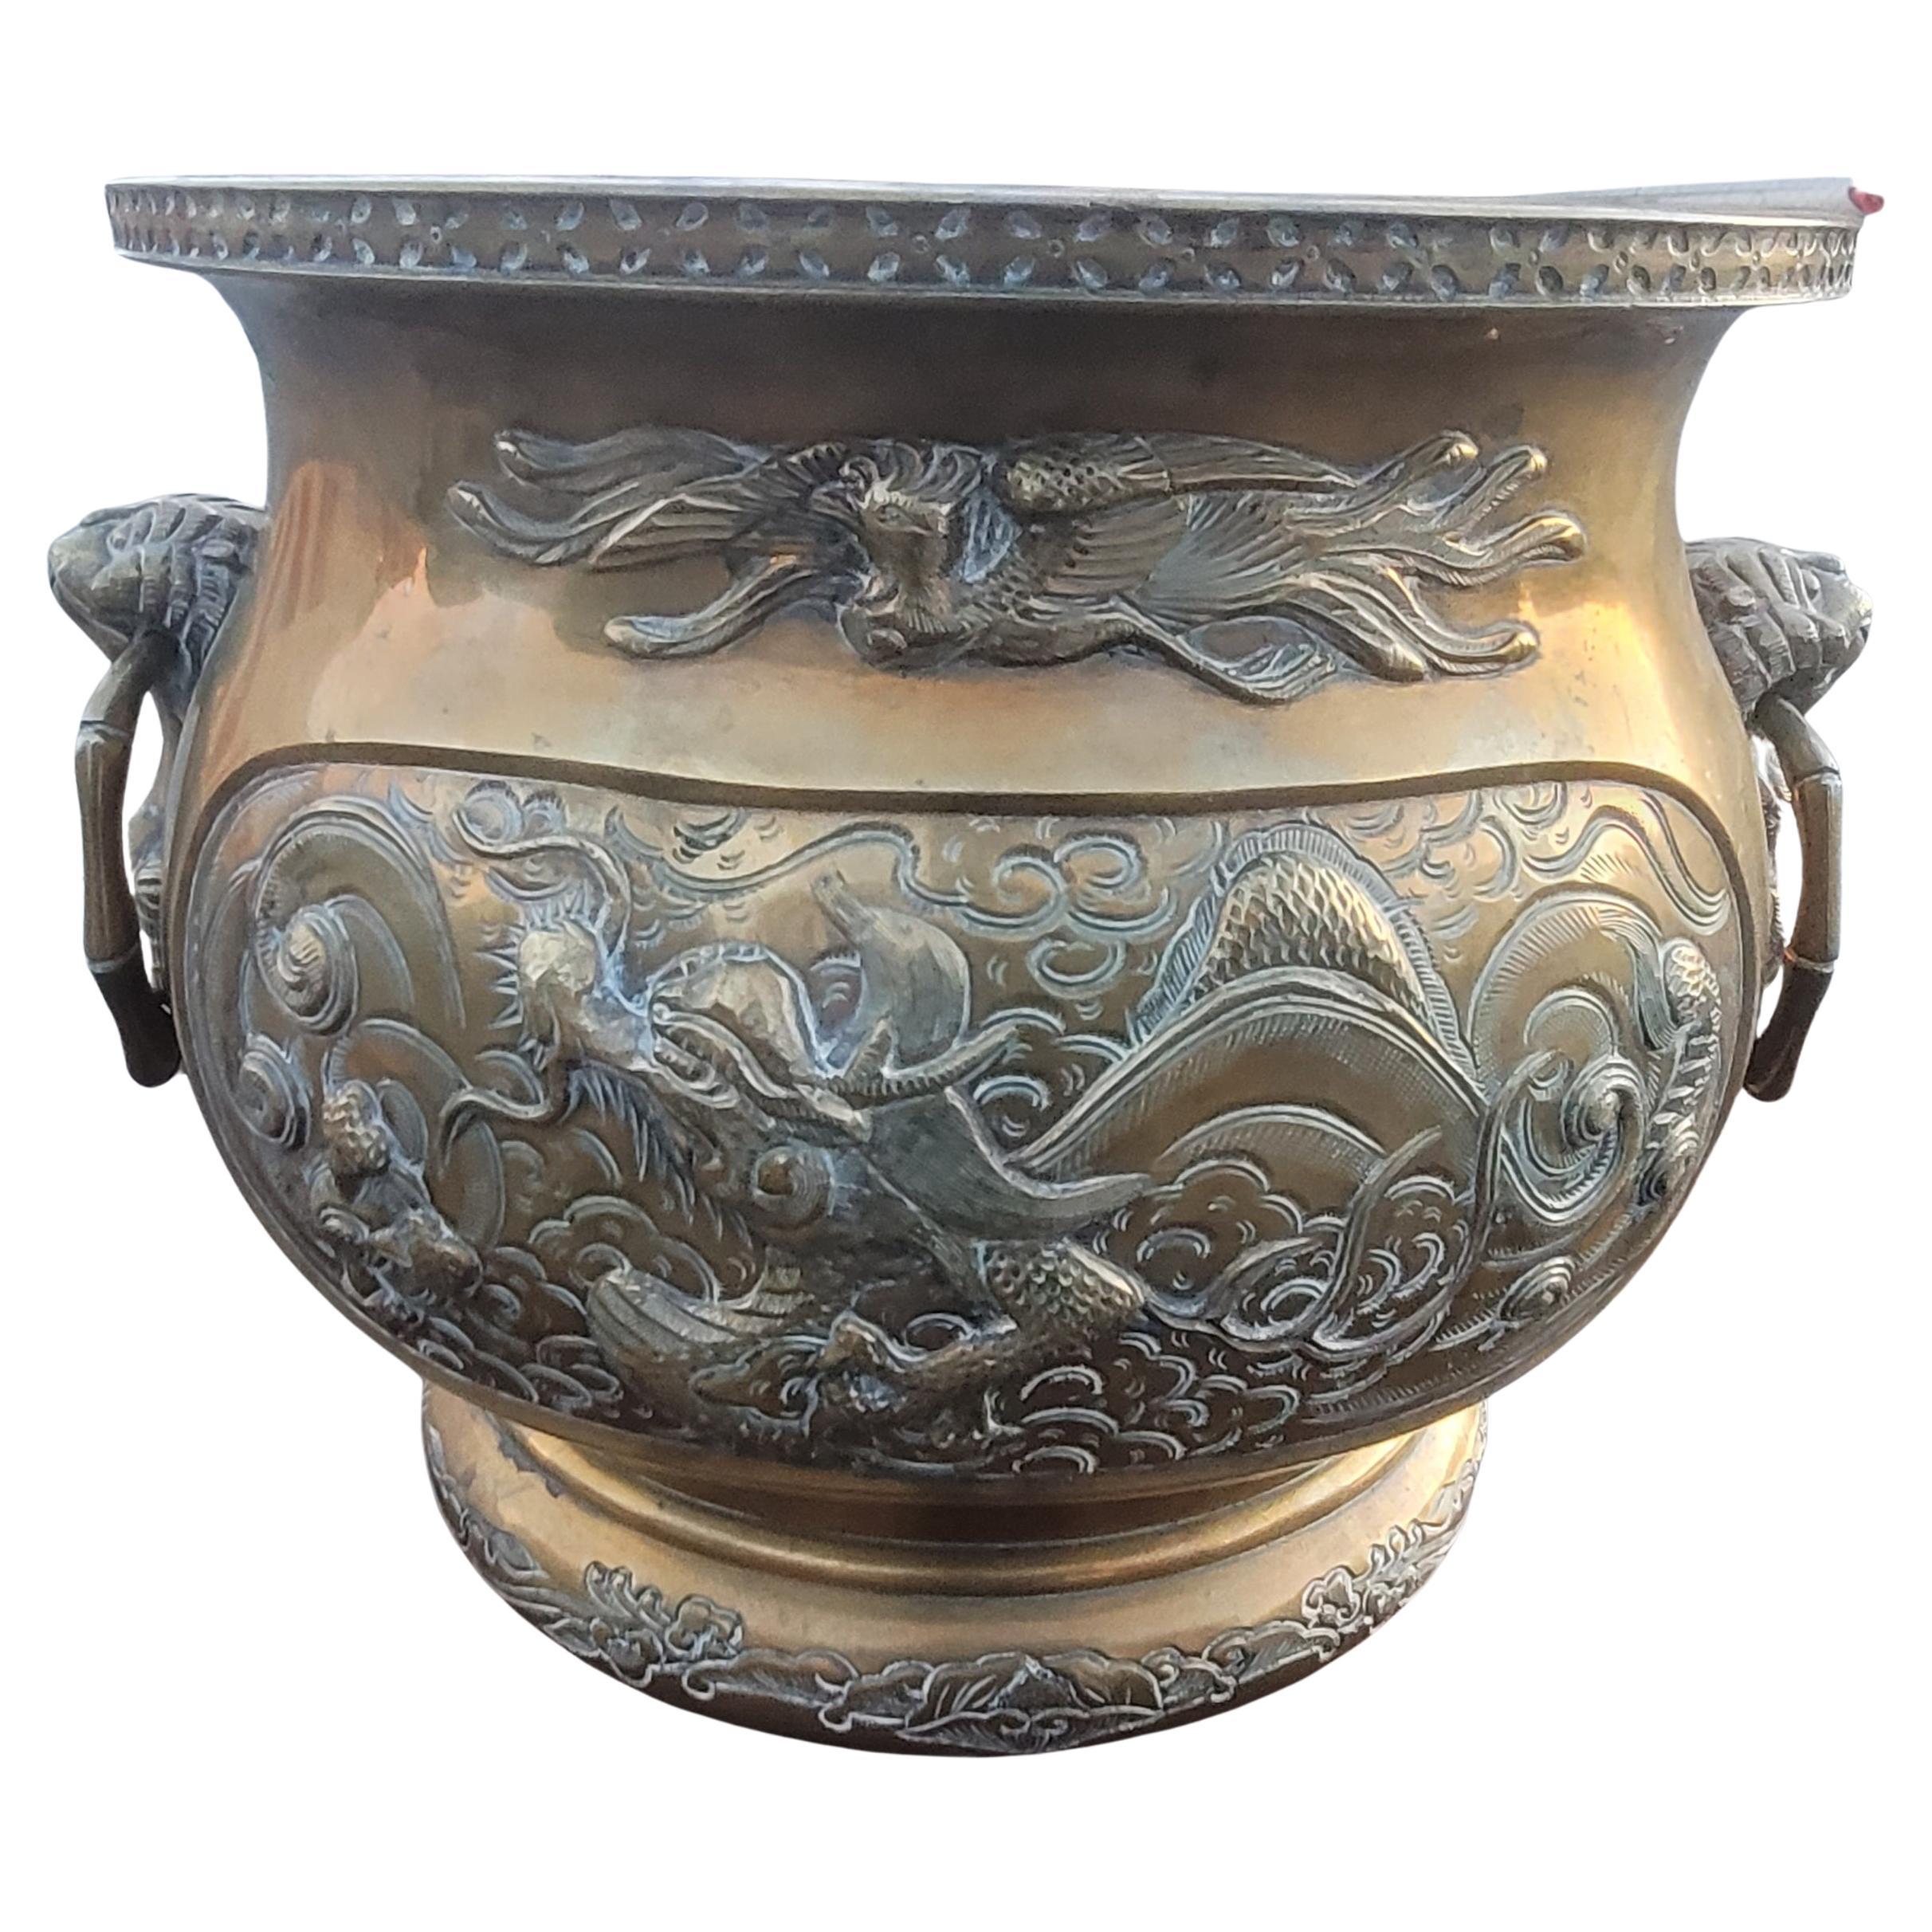 Late 19th century, Qing style Chinese hammered and engraved brass jardinière planter. Heavy duty and weigh about 10lbs. Measures 13